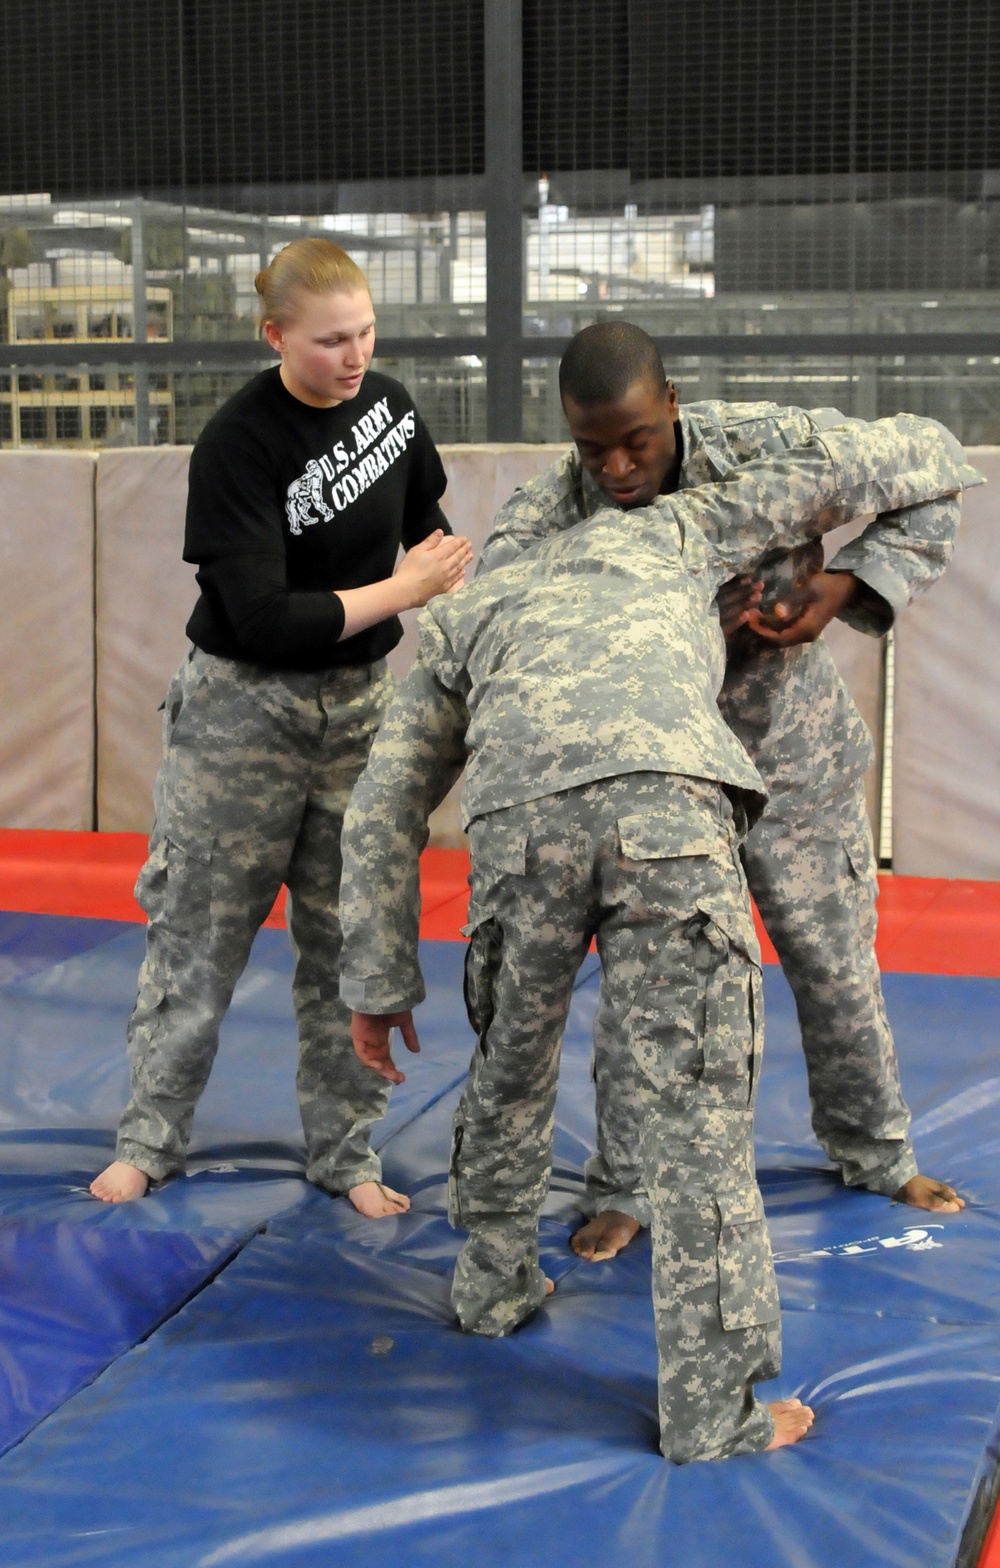 Taking it to the mat: 1st BCT soldiers knock out combatives training